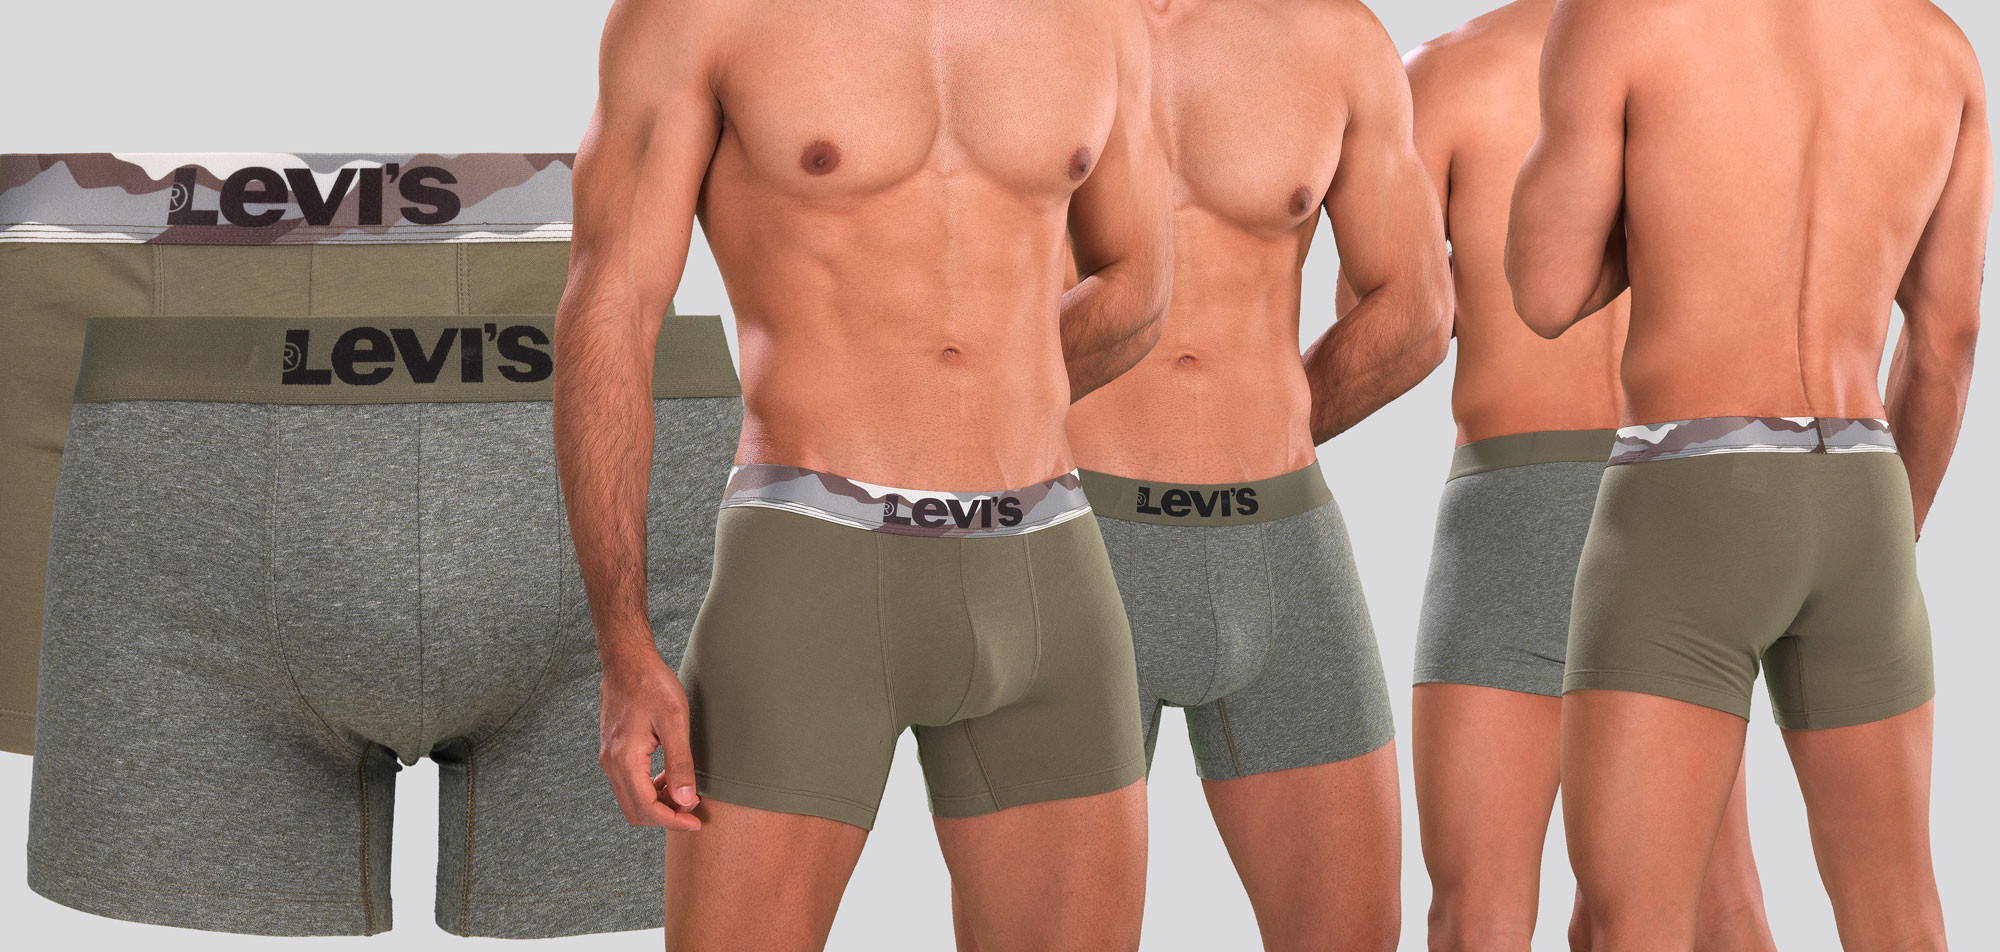 Levi_s Printed Waistband Boxer Brief 2-Pack 905, color Nee